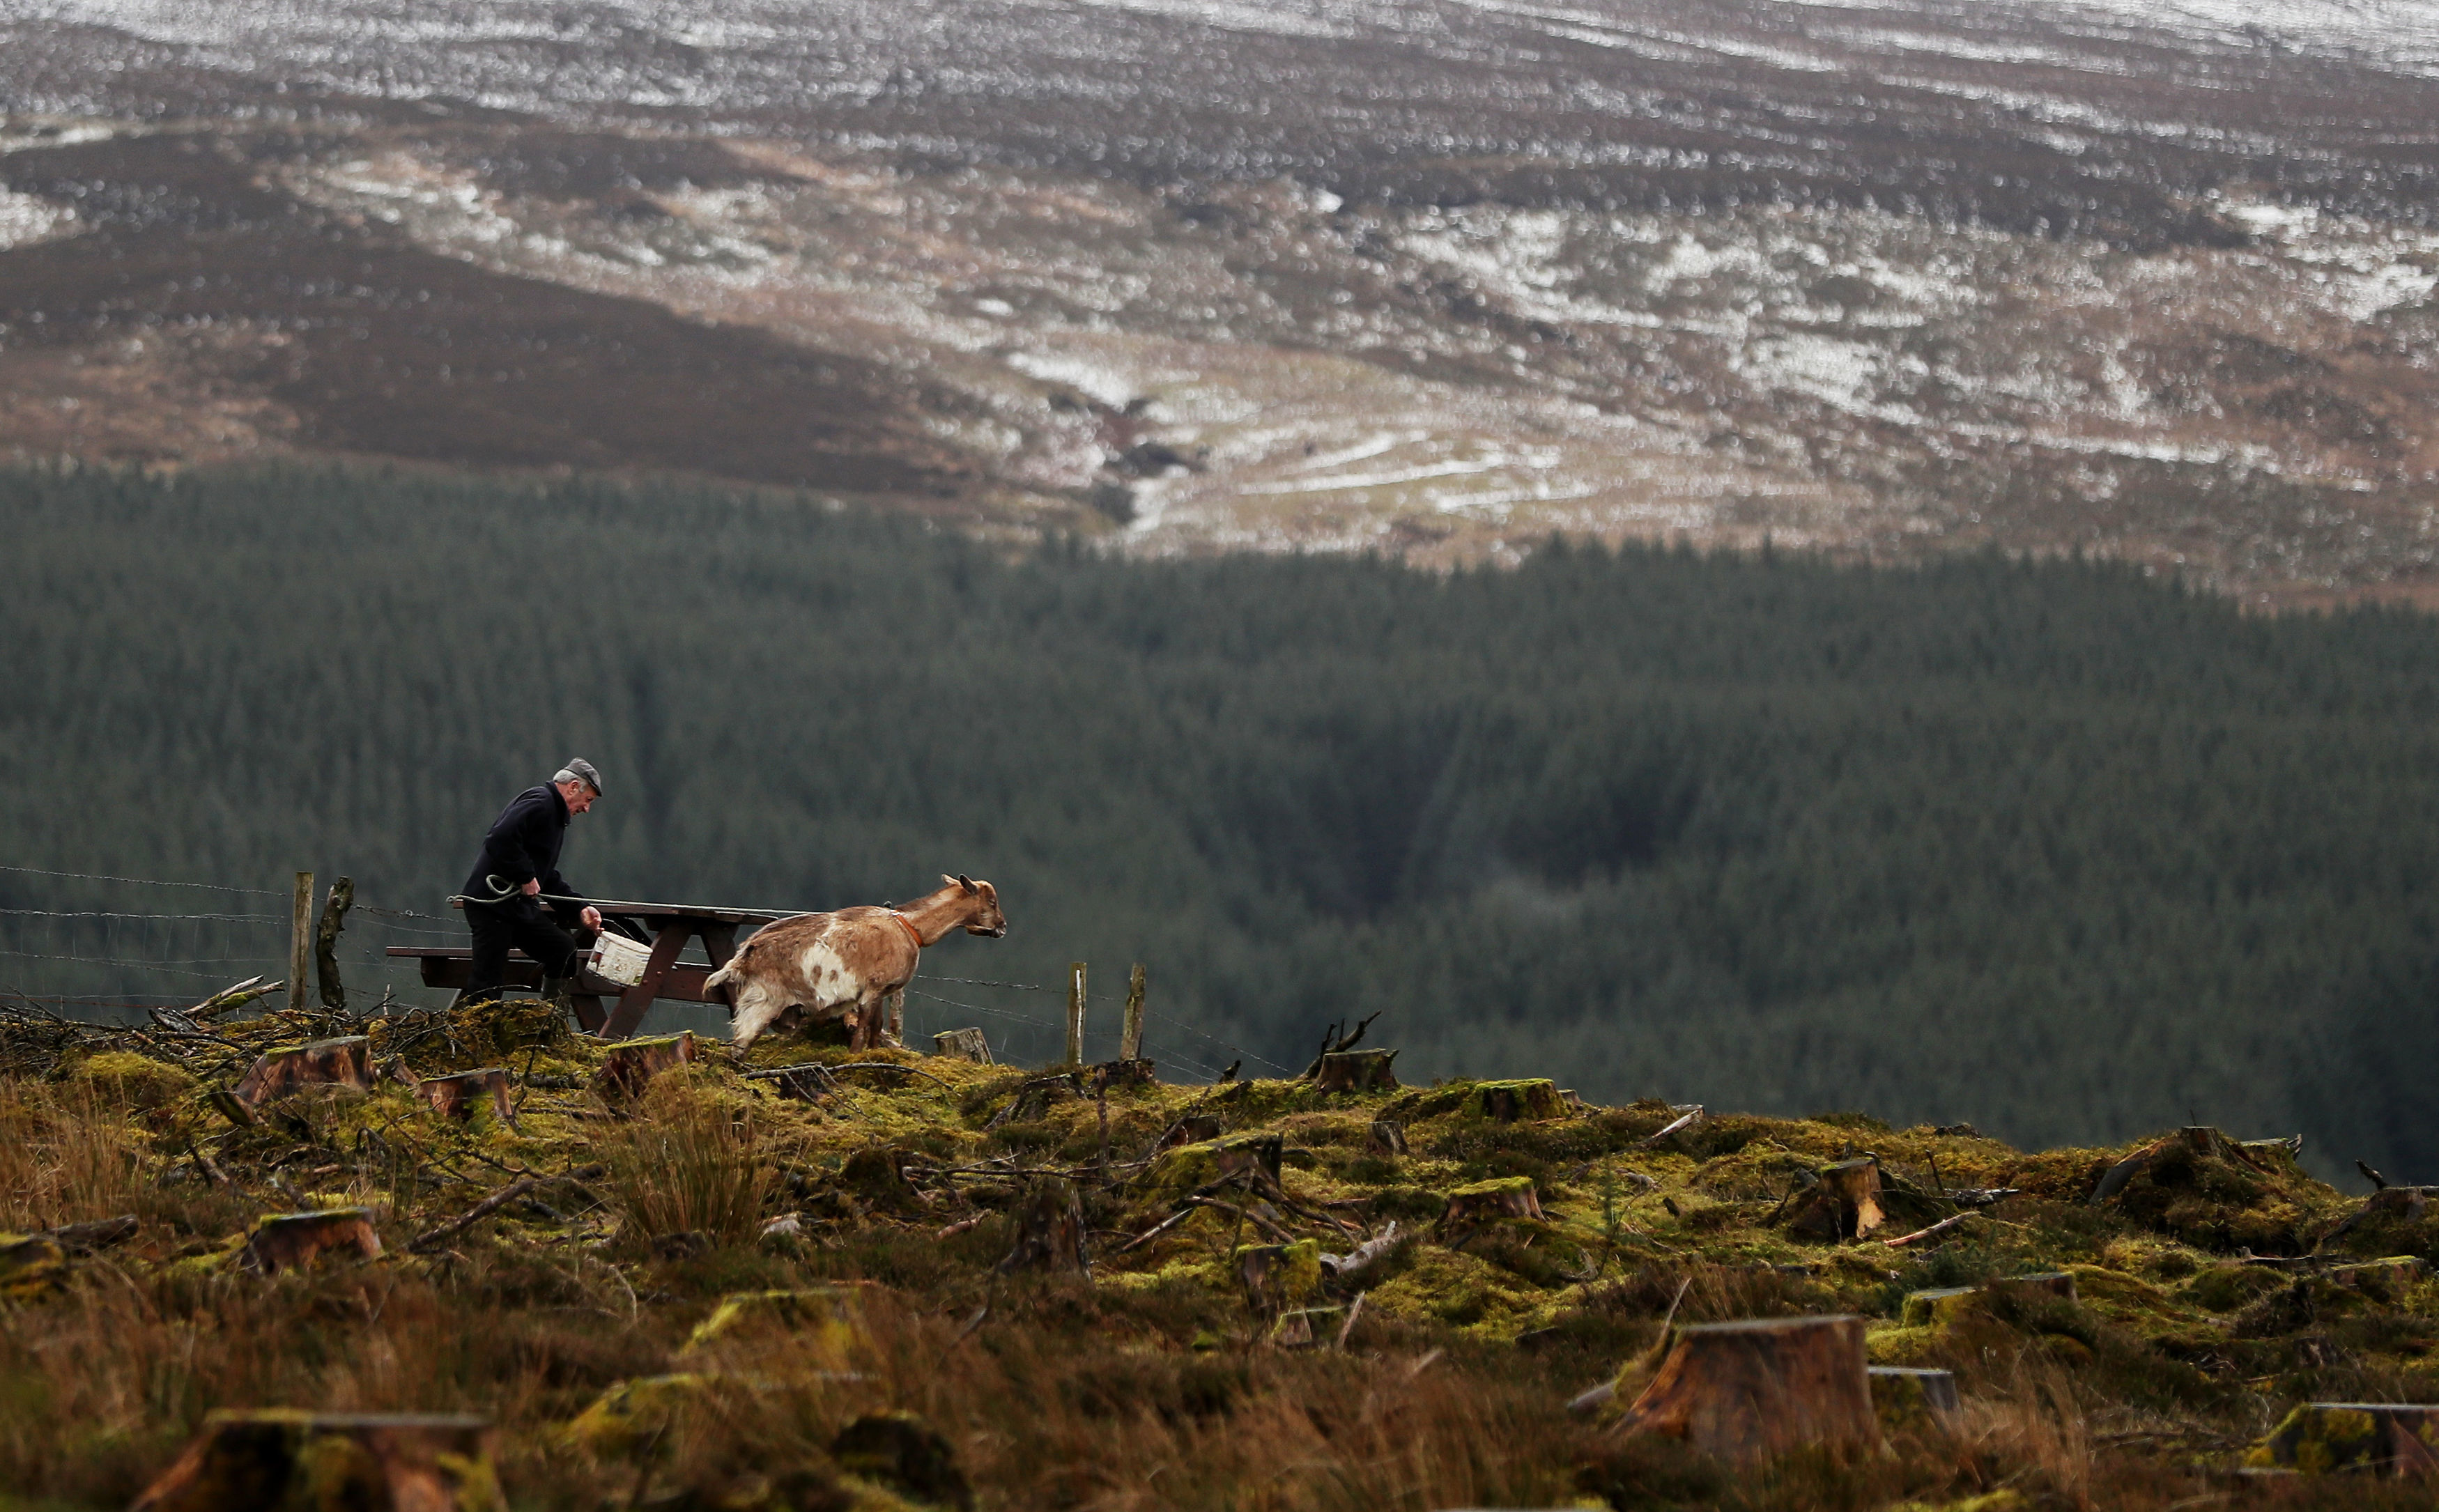 John Rigney, chairman of the Slieve Bloom Association makes his way up Spink Hill, Co. Offaly, for the 'Milking of the Goat' festival. The festival celebrates Imbolc which marks the beginning of spring and is one of the four Celtic seasonal festivals